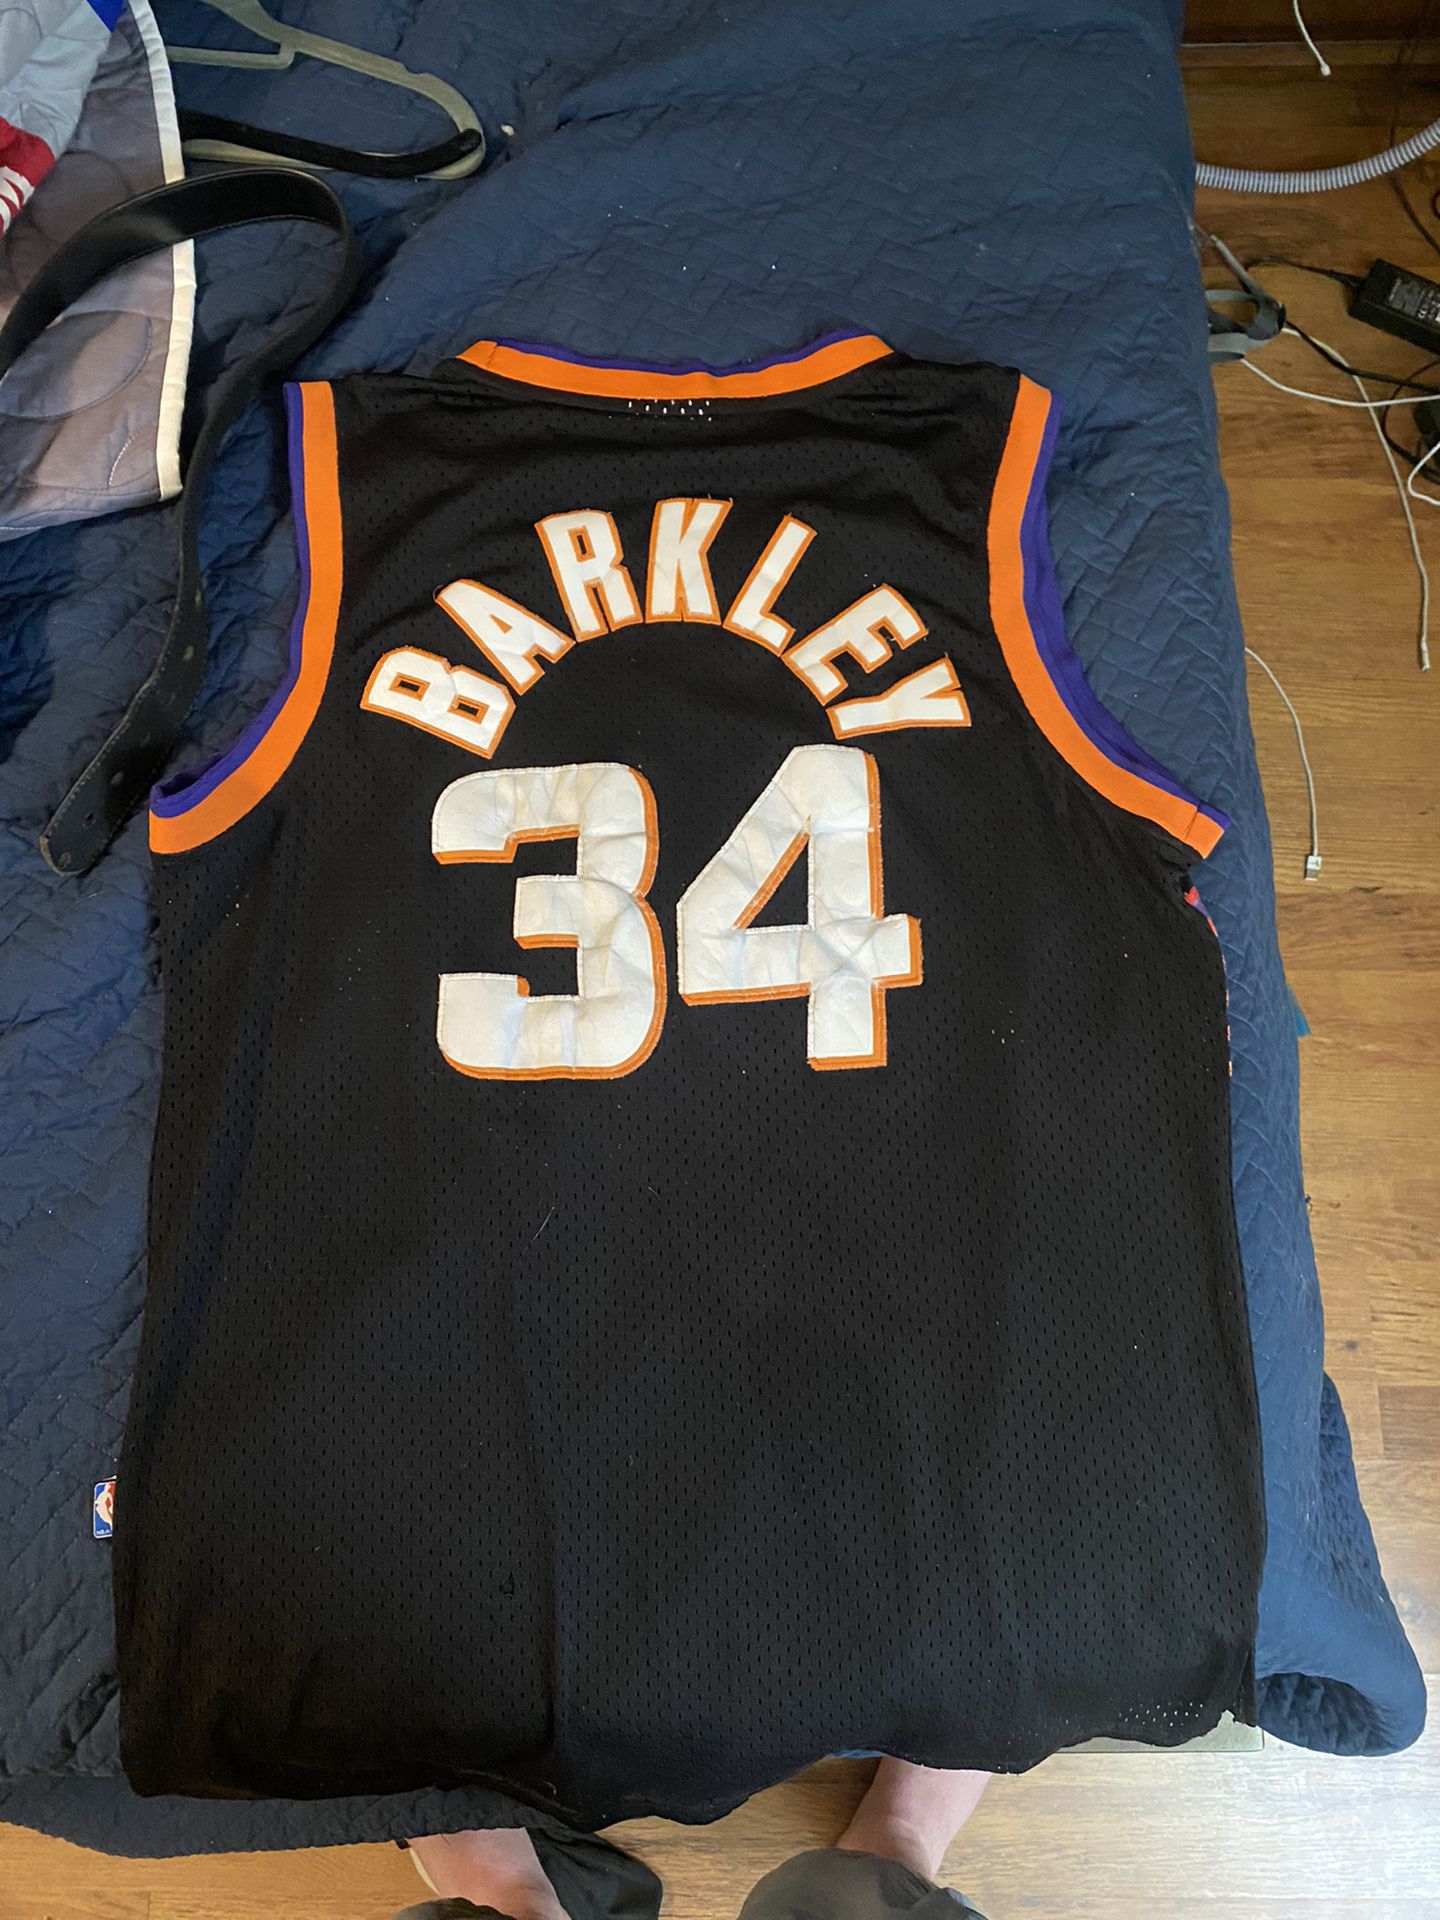 Charles Barkley Suns NBA Jersey for Sale in Lakewood, CA - OfferUp